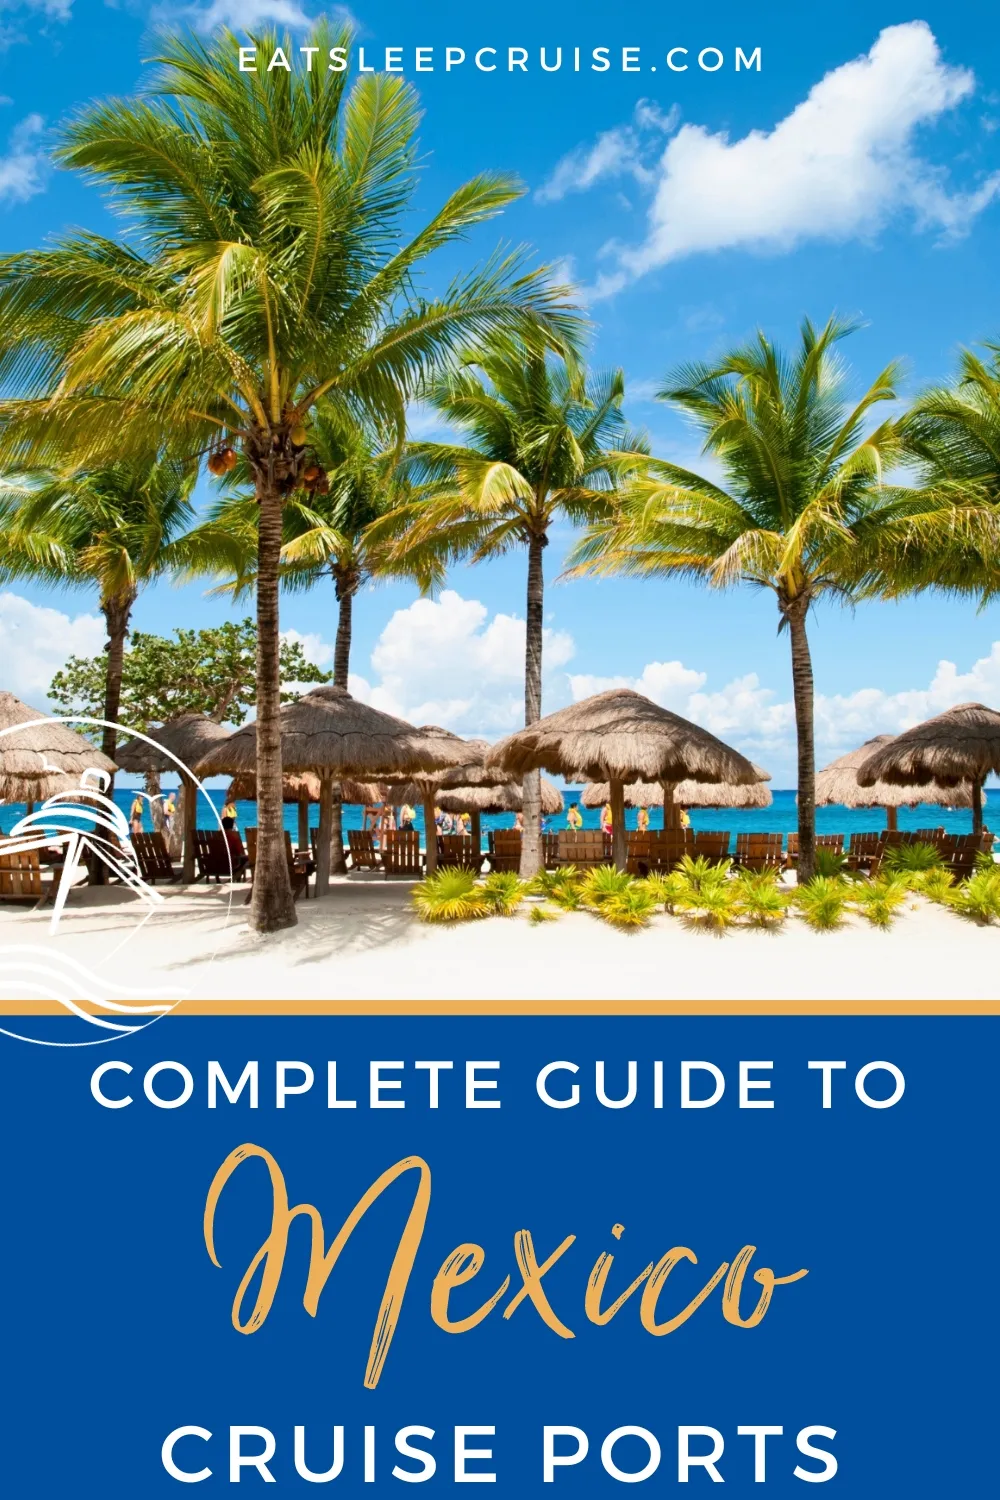 Complete Guide to All the Cruise Ports in Mexico